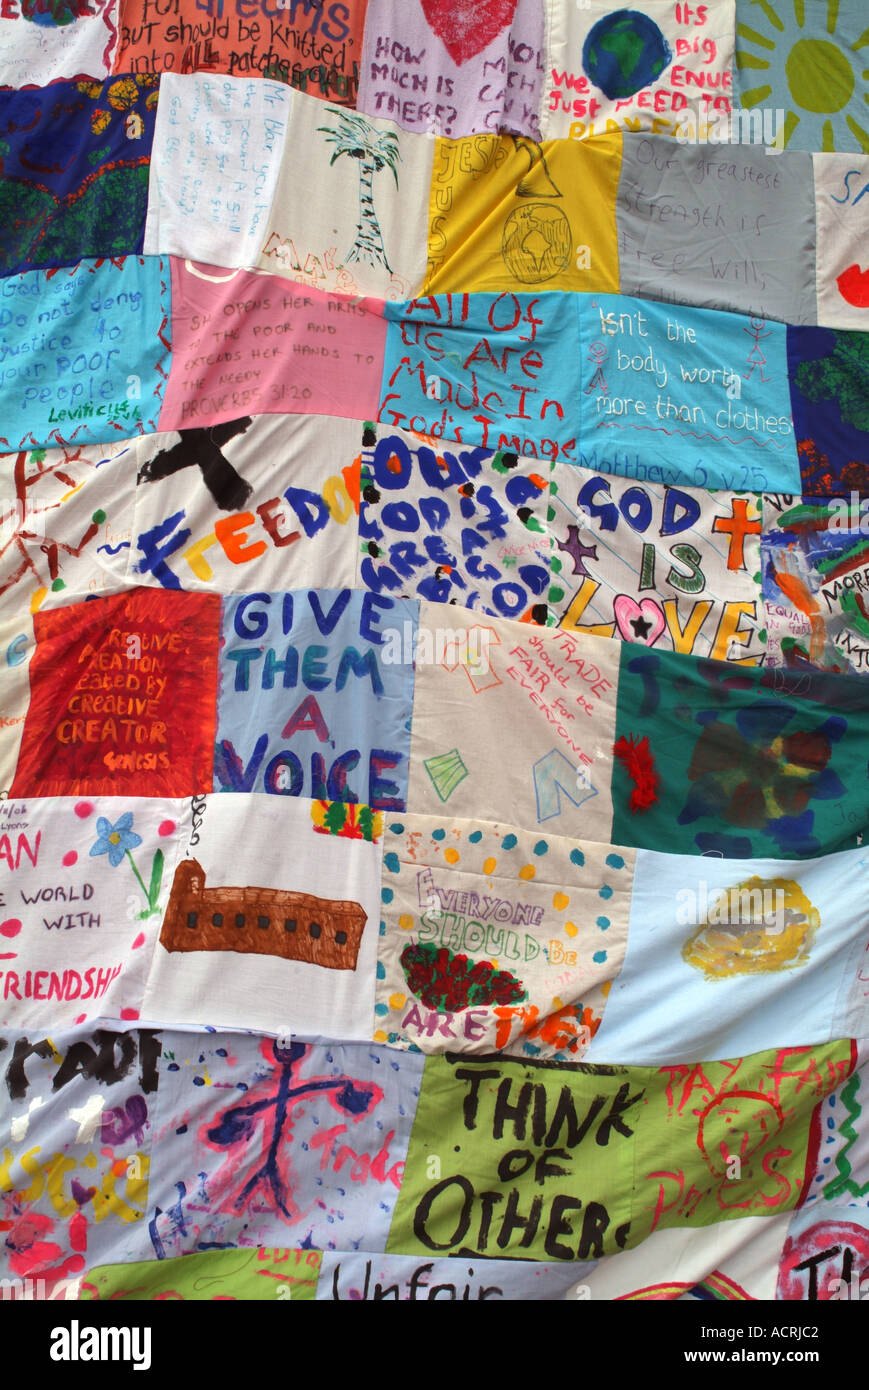 Part of the patchwork that made up the Speak Cafe tent at the MAKE POVERTY HISTORY rally on the Meadows, Edinburgh, Scotland, UK Stock Photo